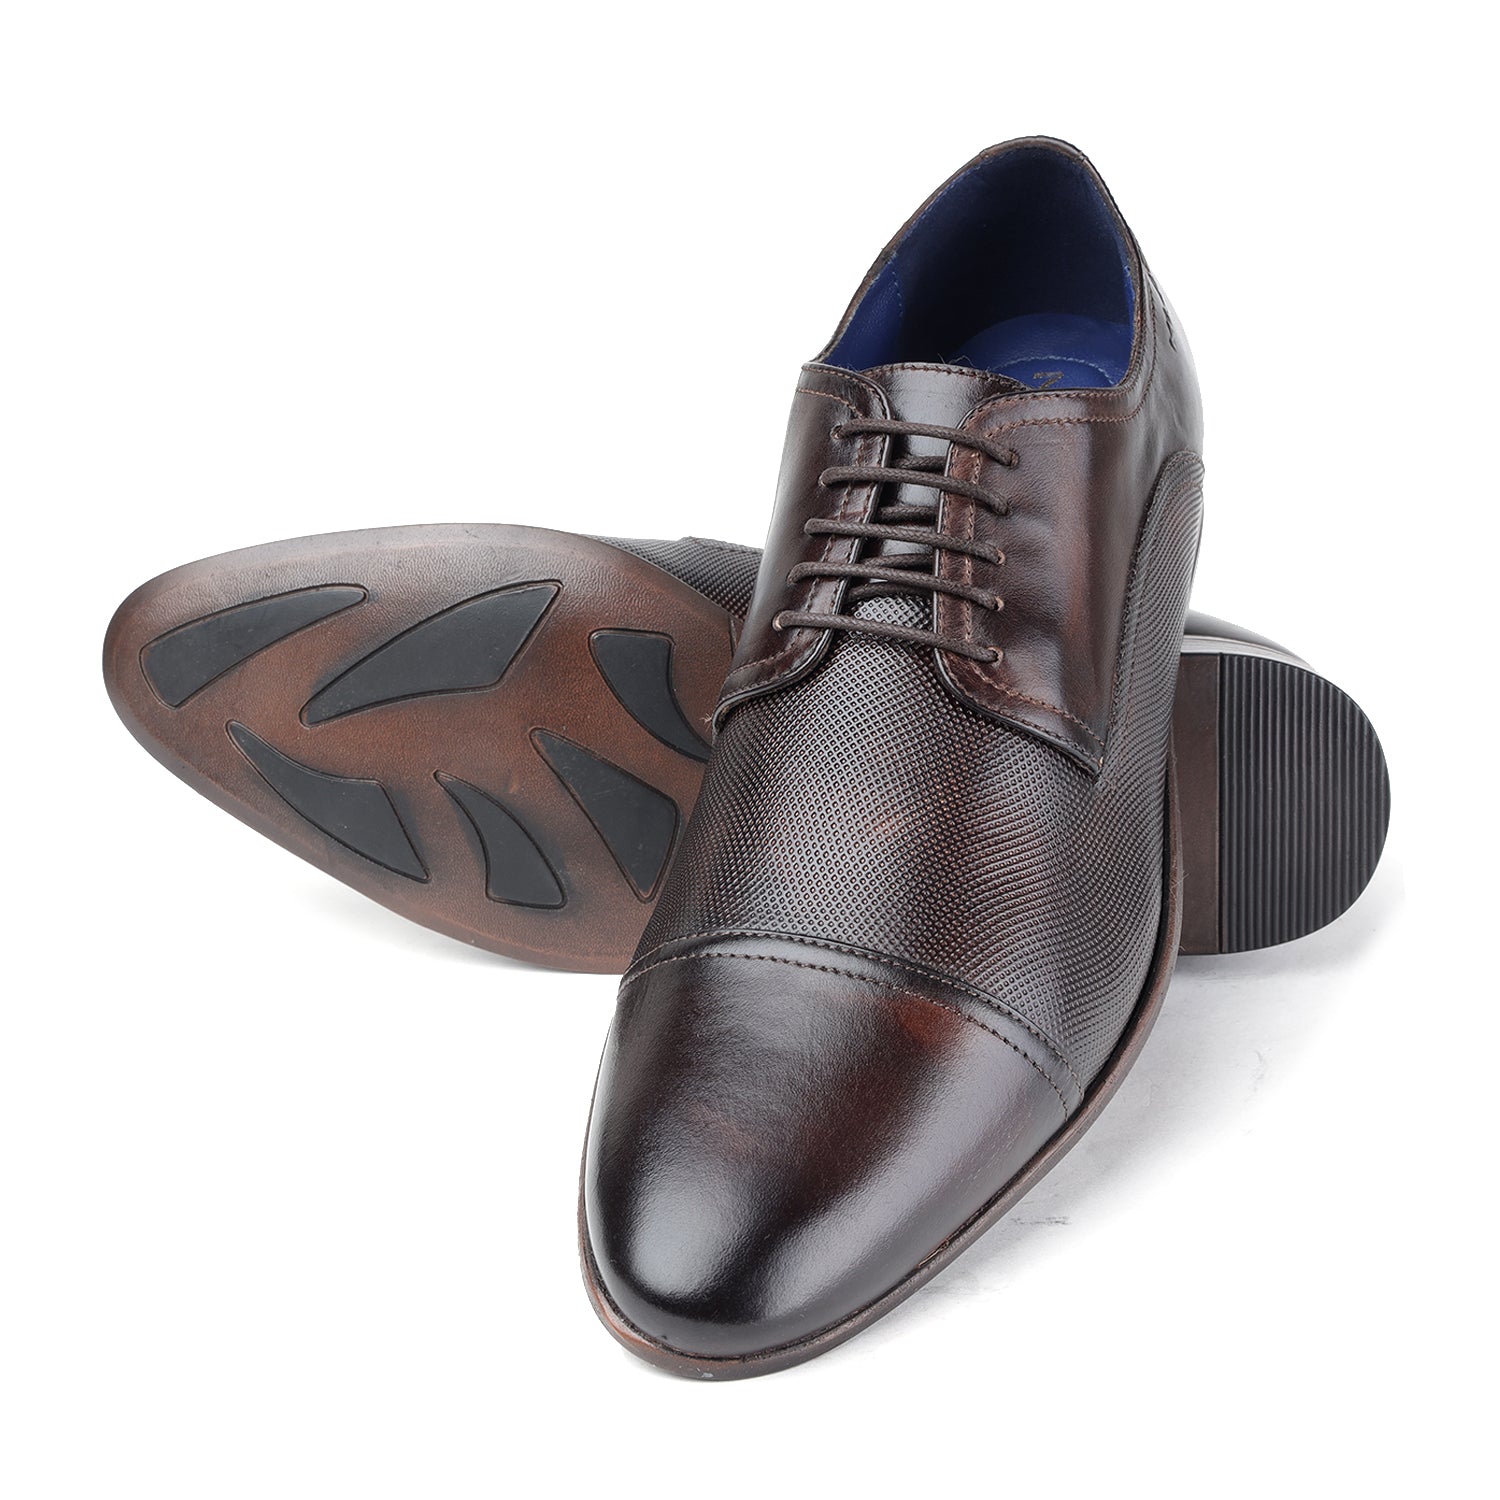 MASABIH GENUINE LEATHER BROWN TOE CAP DERBY SHOES FOR MEN